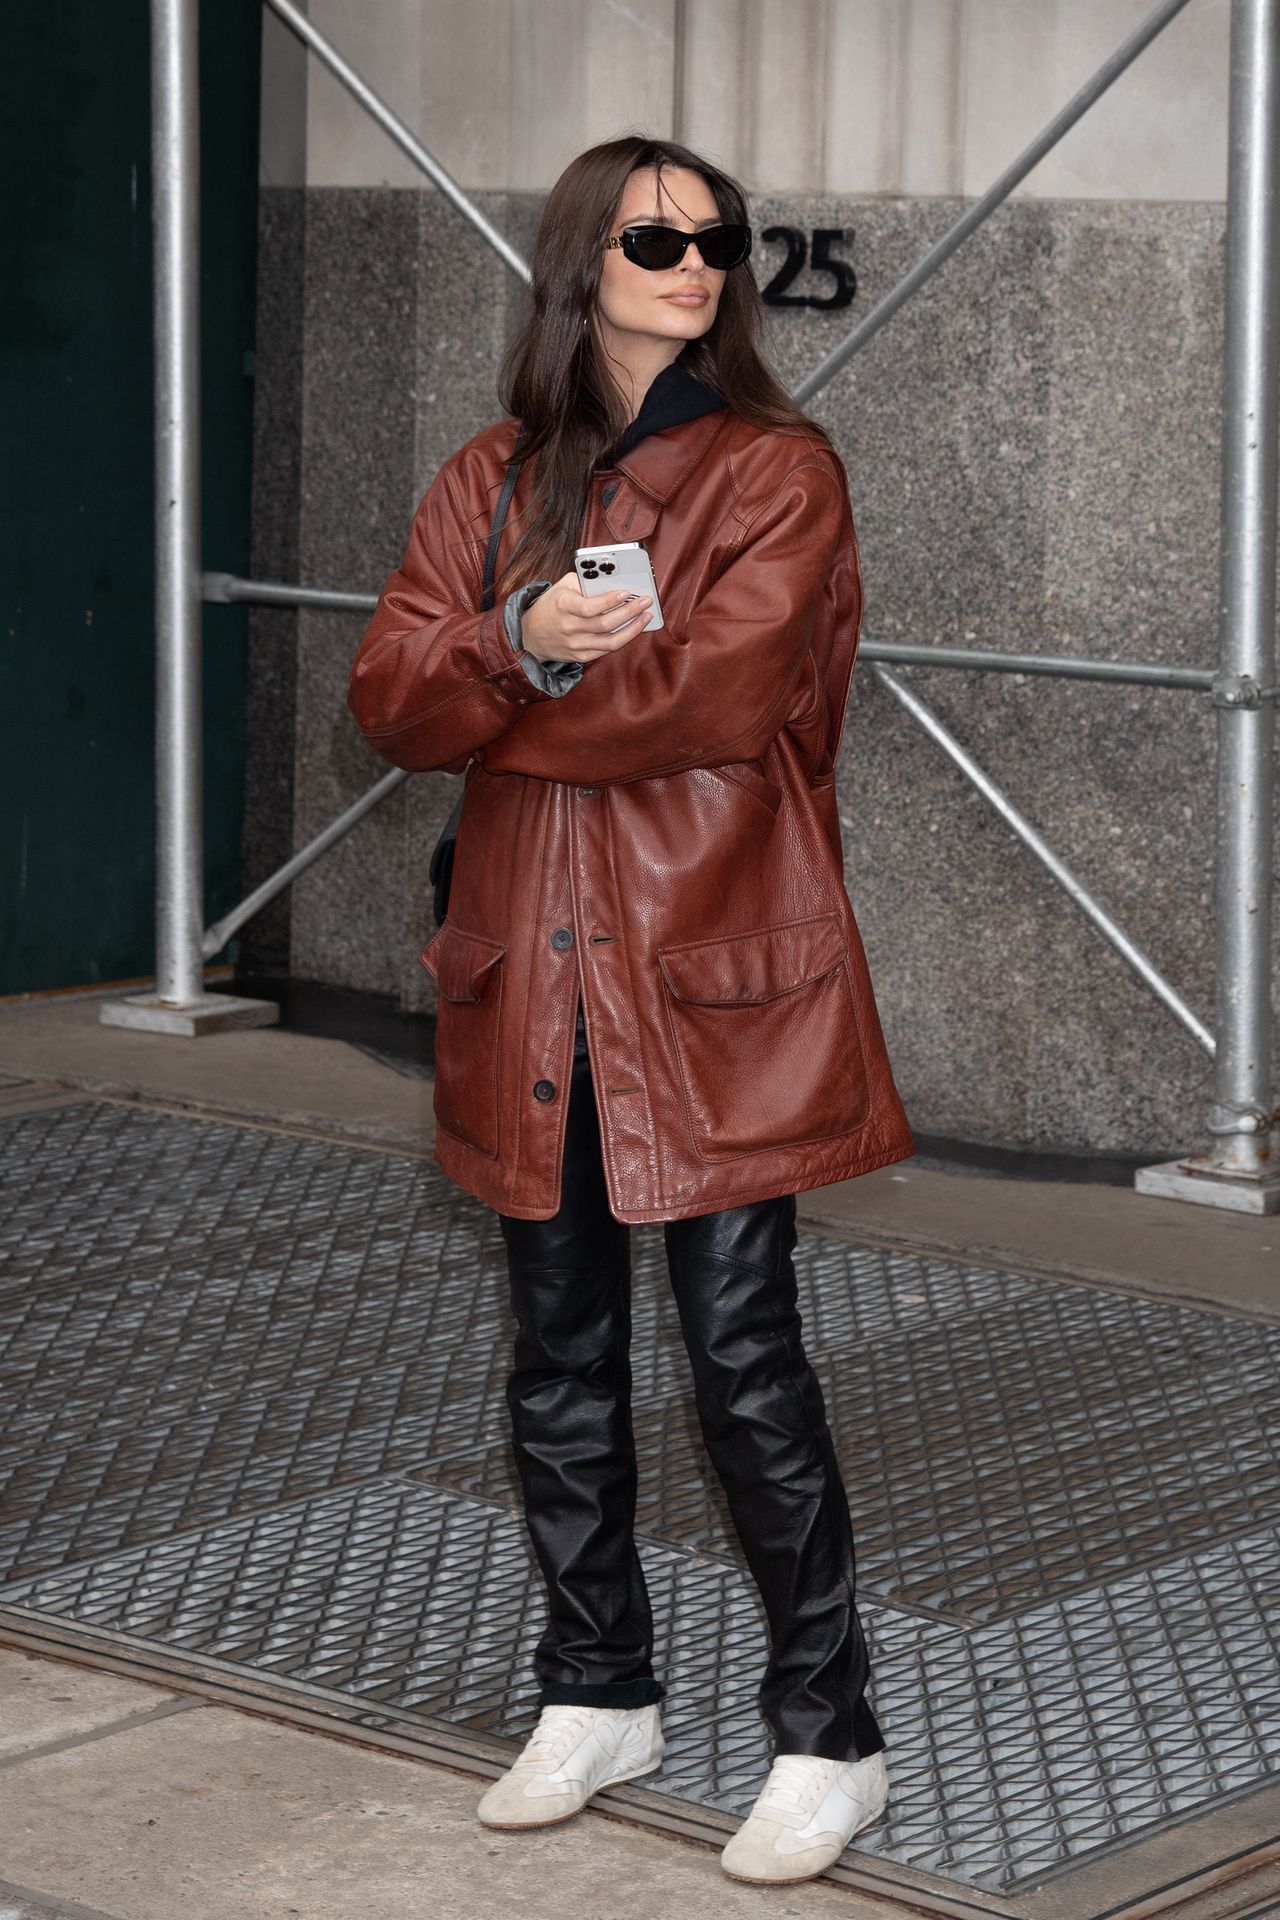 Emily Ratajkowski in a total leather look